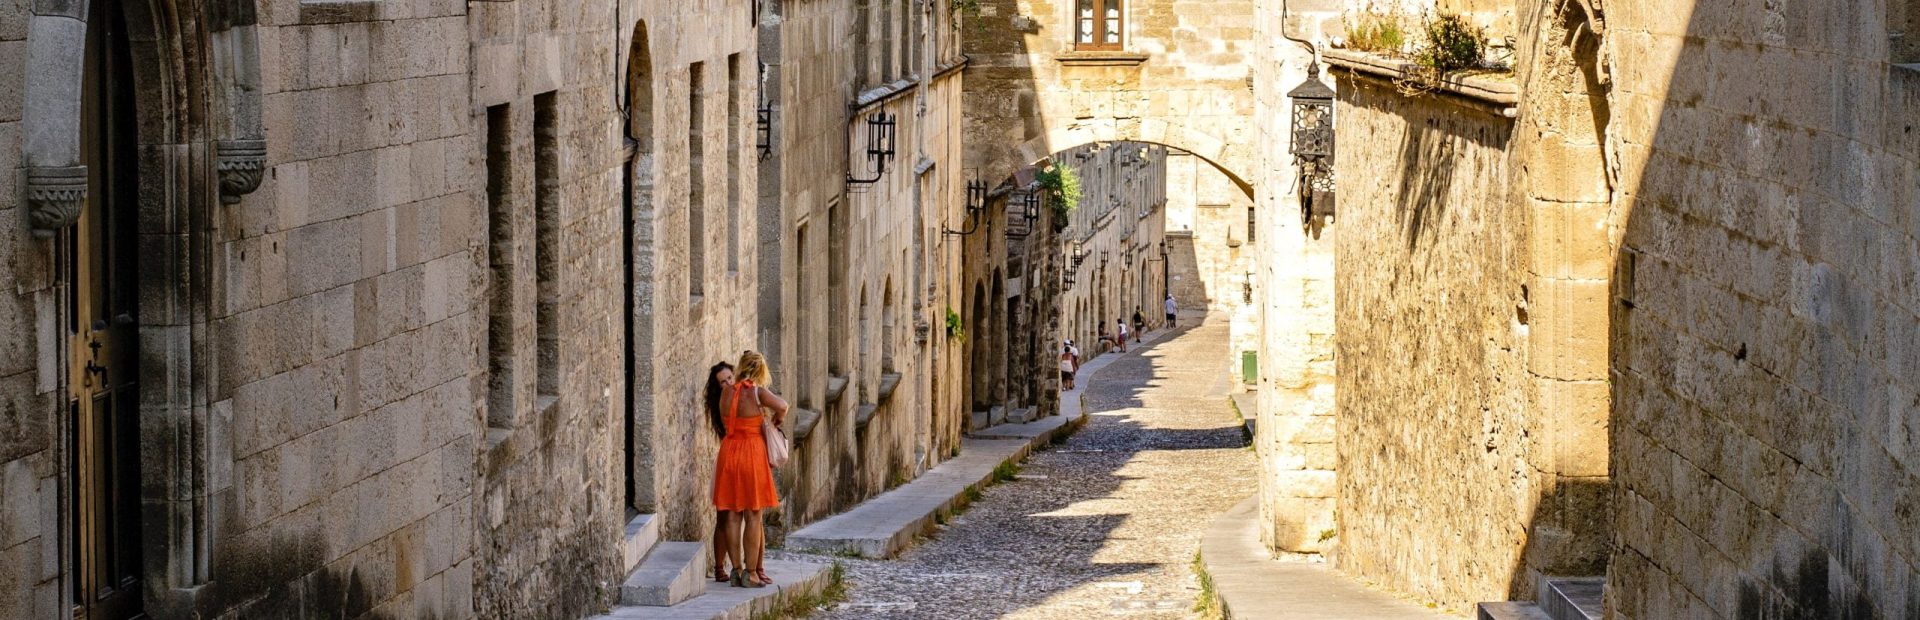 Rhodes-knights-district-Glimpses-of-the-World